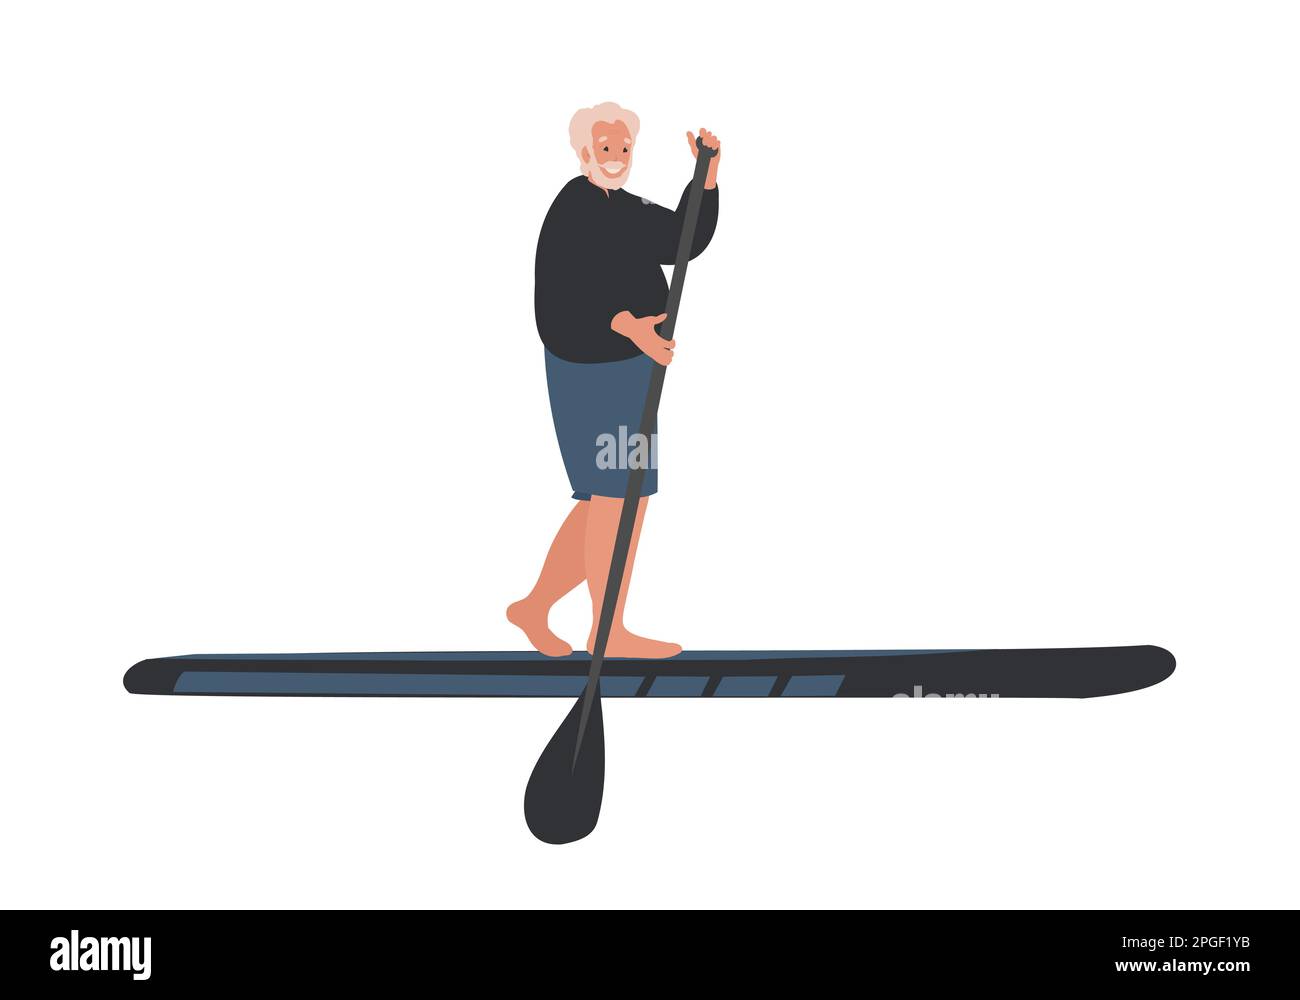 Senior Man stand on sup board with paddle Stock Vector